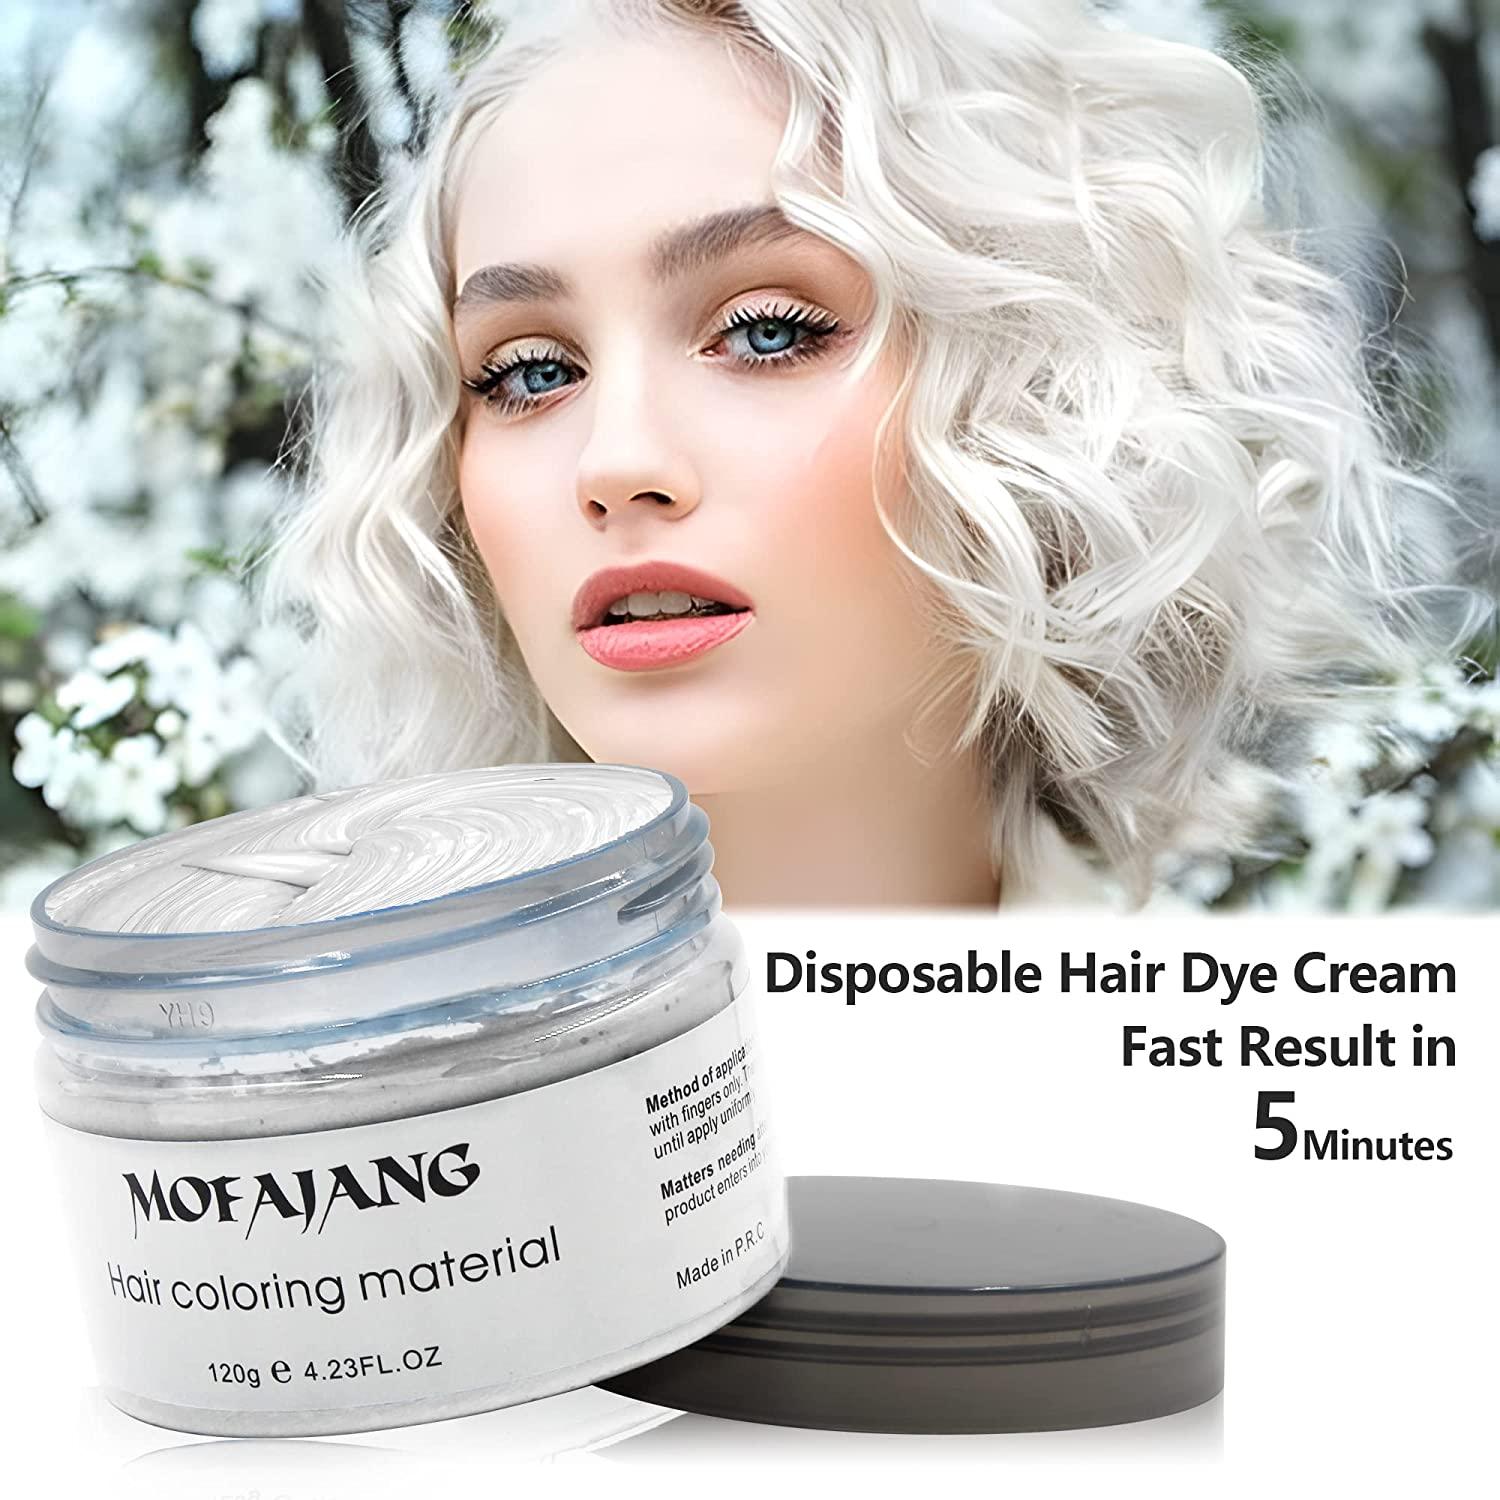 White Hair Color Wax Pomades  oz - Natural Hair Coloring Wax Material  Disposable Hair Styling Clays Ash for Cosplay Party (White)  Ounce  (Pack of 1) 03 White